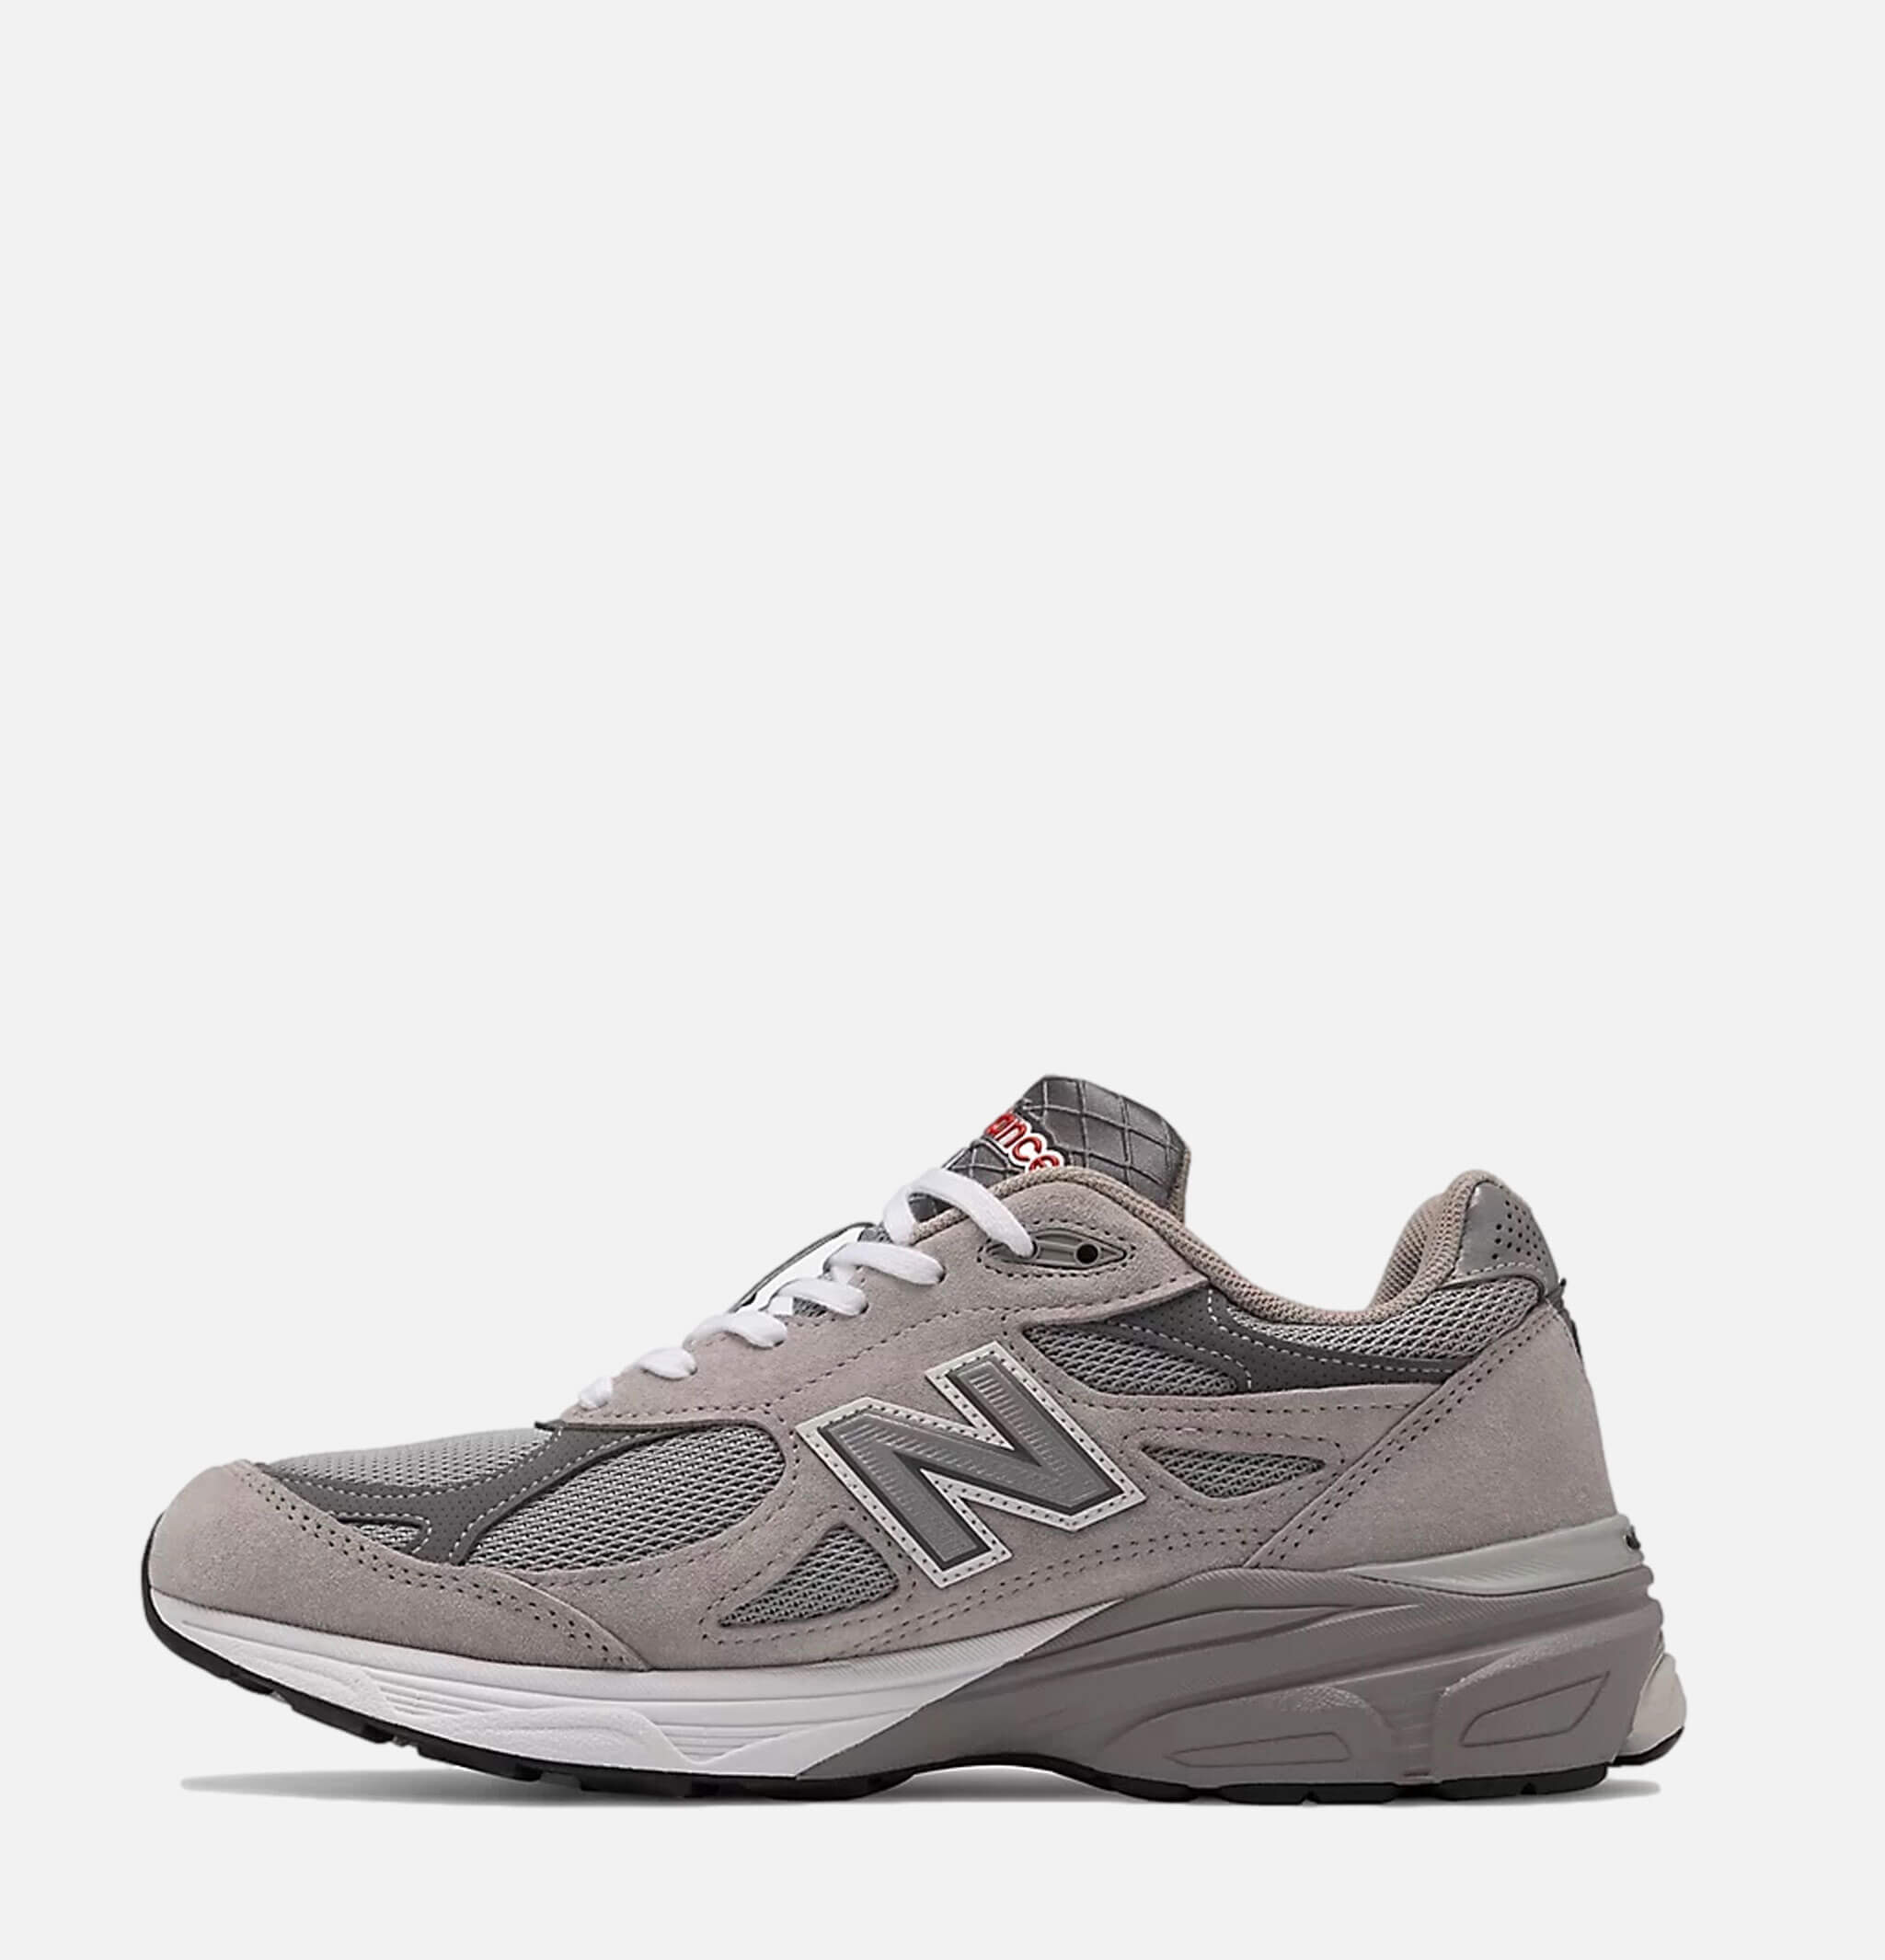 New Balance | Sneakers | 990v3 | Made In Usa | Grey | Royalcheese